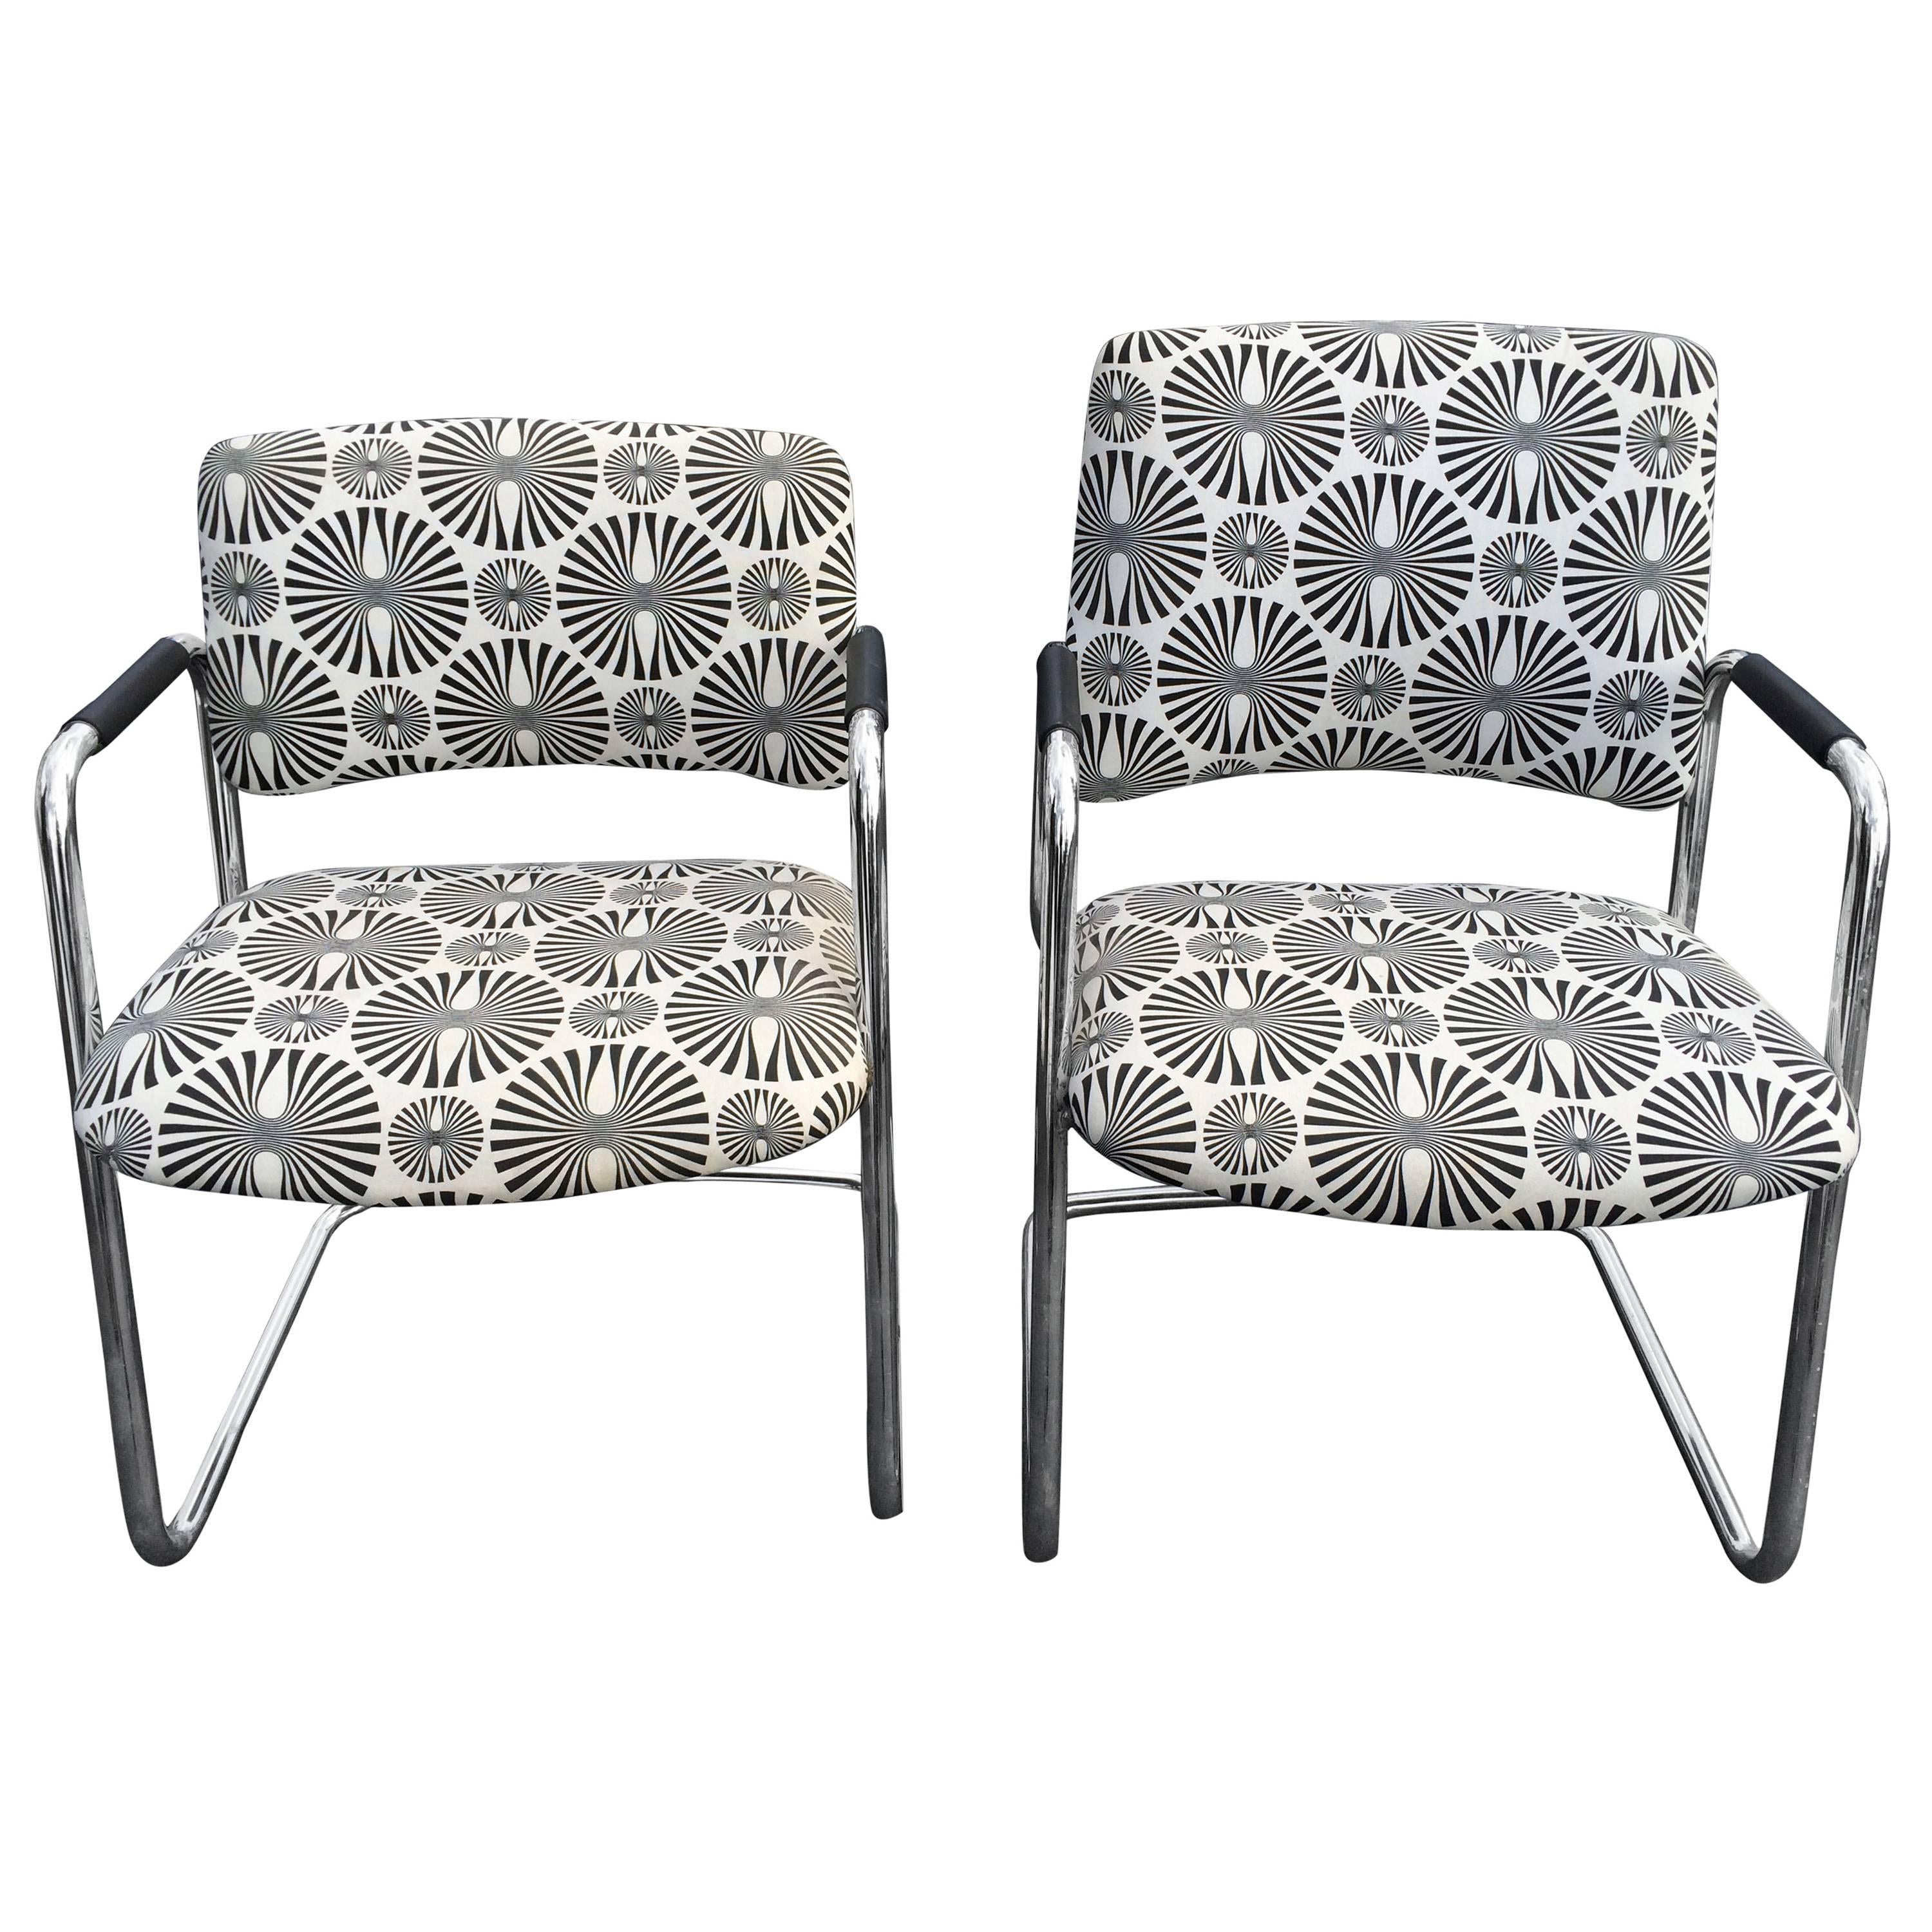 Pair of Mid-Century Optical Art Chairs in Black and White